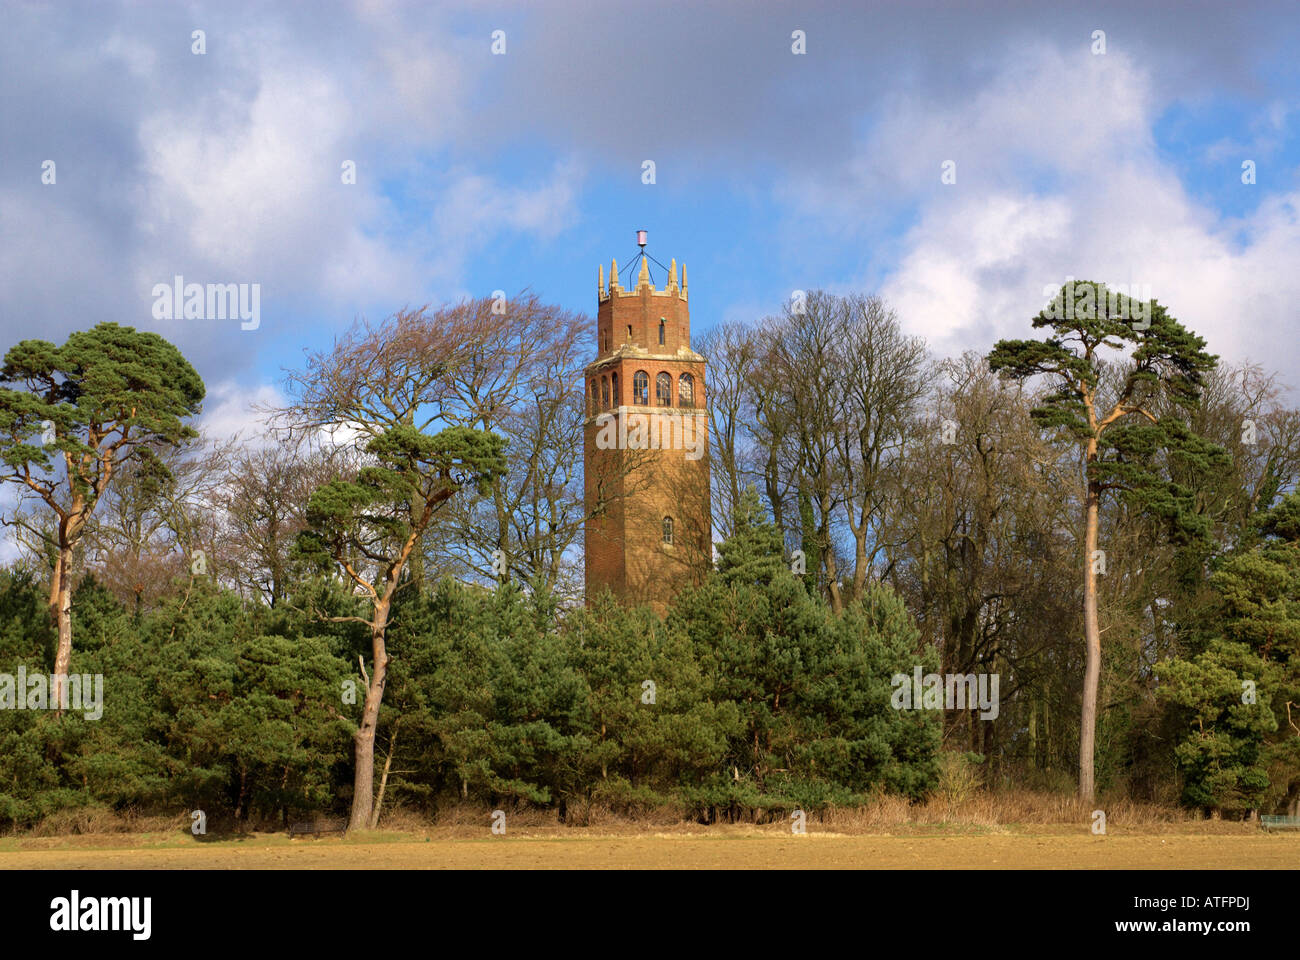 The Folly, Faringdon, Oxfordshire was built in 1935 by Lord Berners. Stock Photo